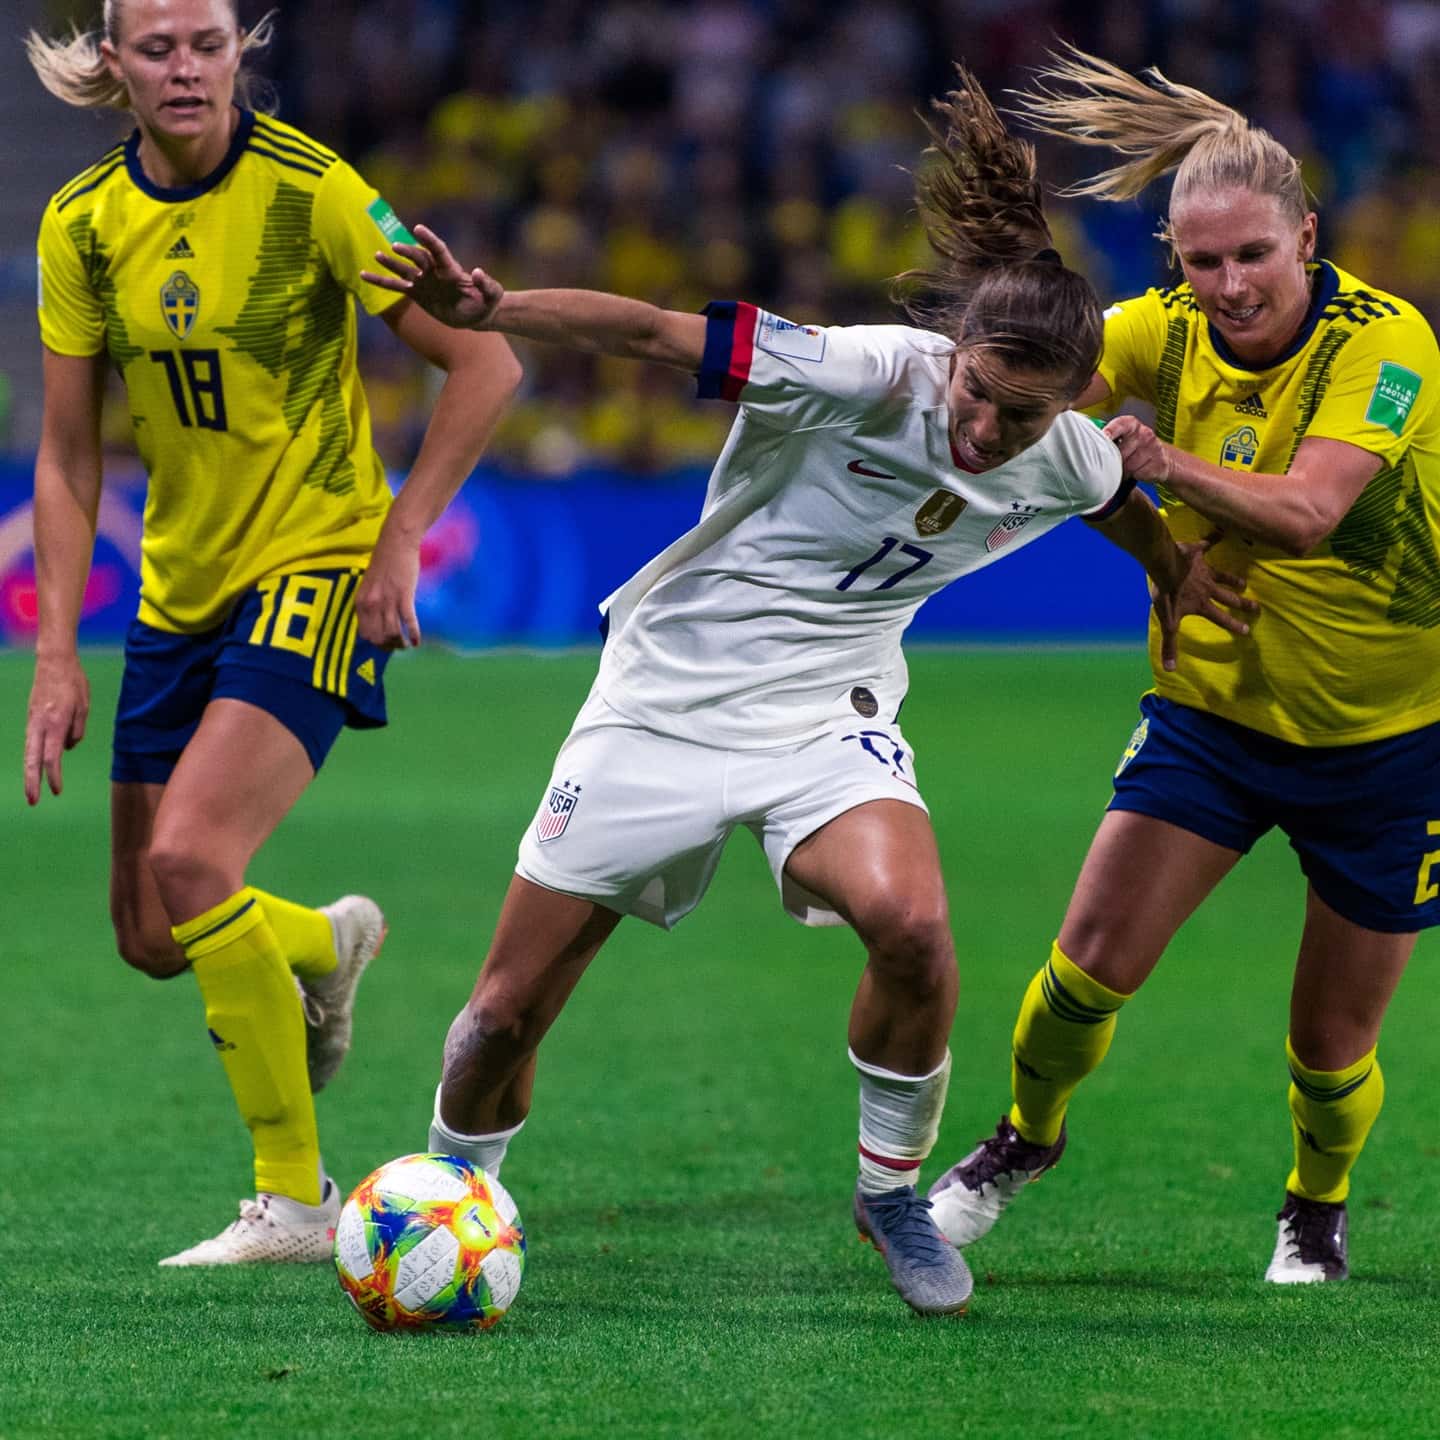 USA vs. Sweden Preview, Schedule, TV Channels & Start Time